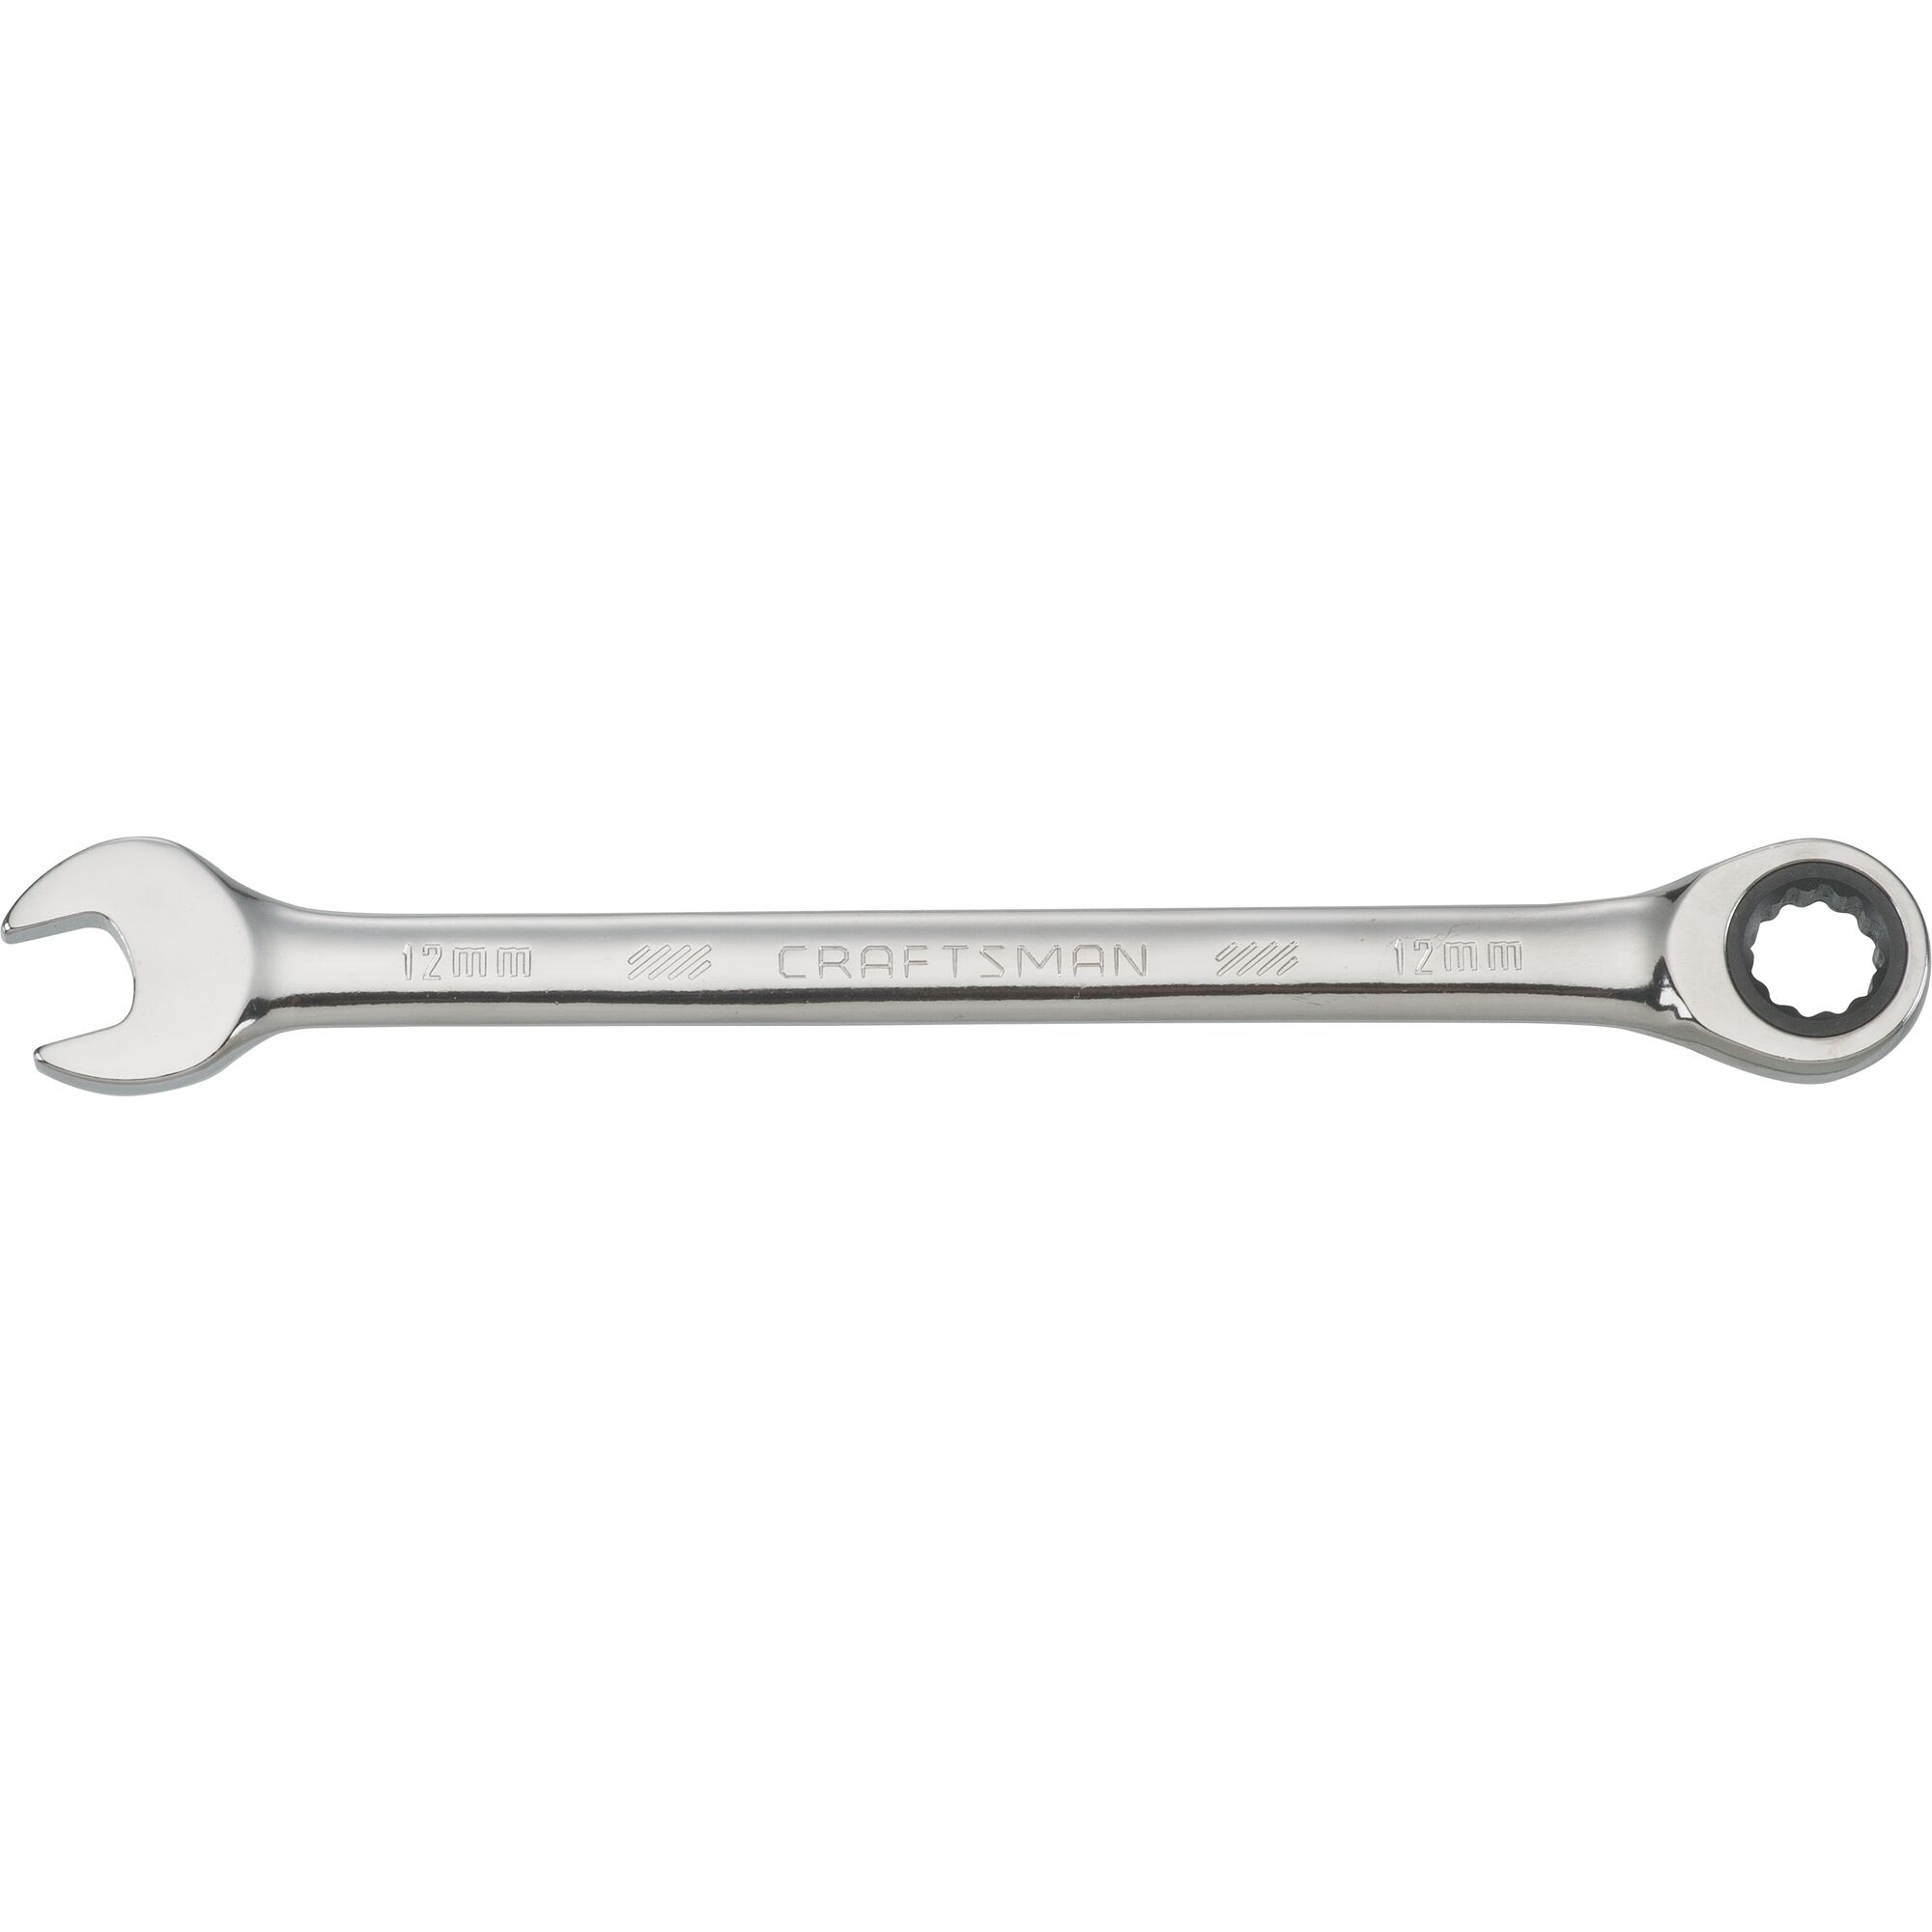 12 millimeter 72 tooth 12 point metric ratcheting wrench.